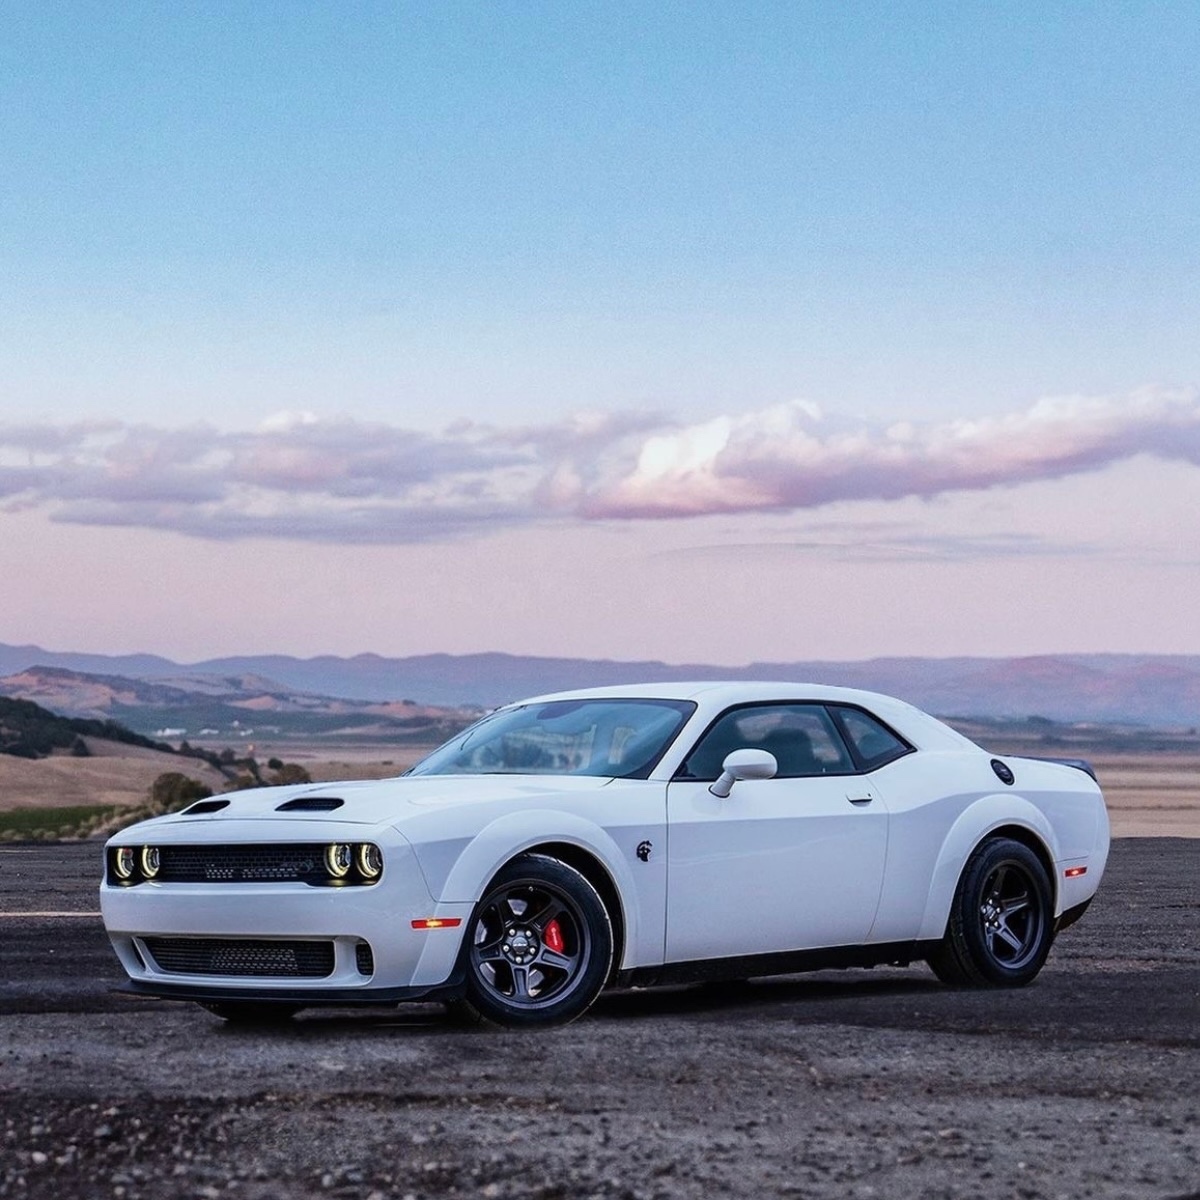 Sleek lines, powerful performance – the #DodgeChallenger is your ticket to a driving experience like no other. Swing by today and start your new journeys with the power and style of your new ride! #CarCrushWednesday #Dodge #DodgeUSA